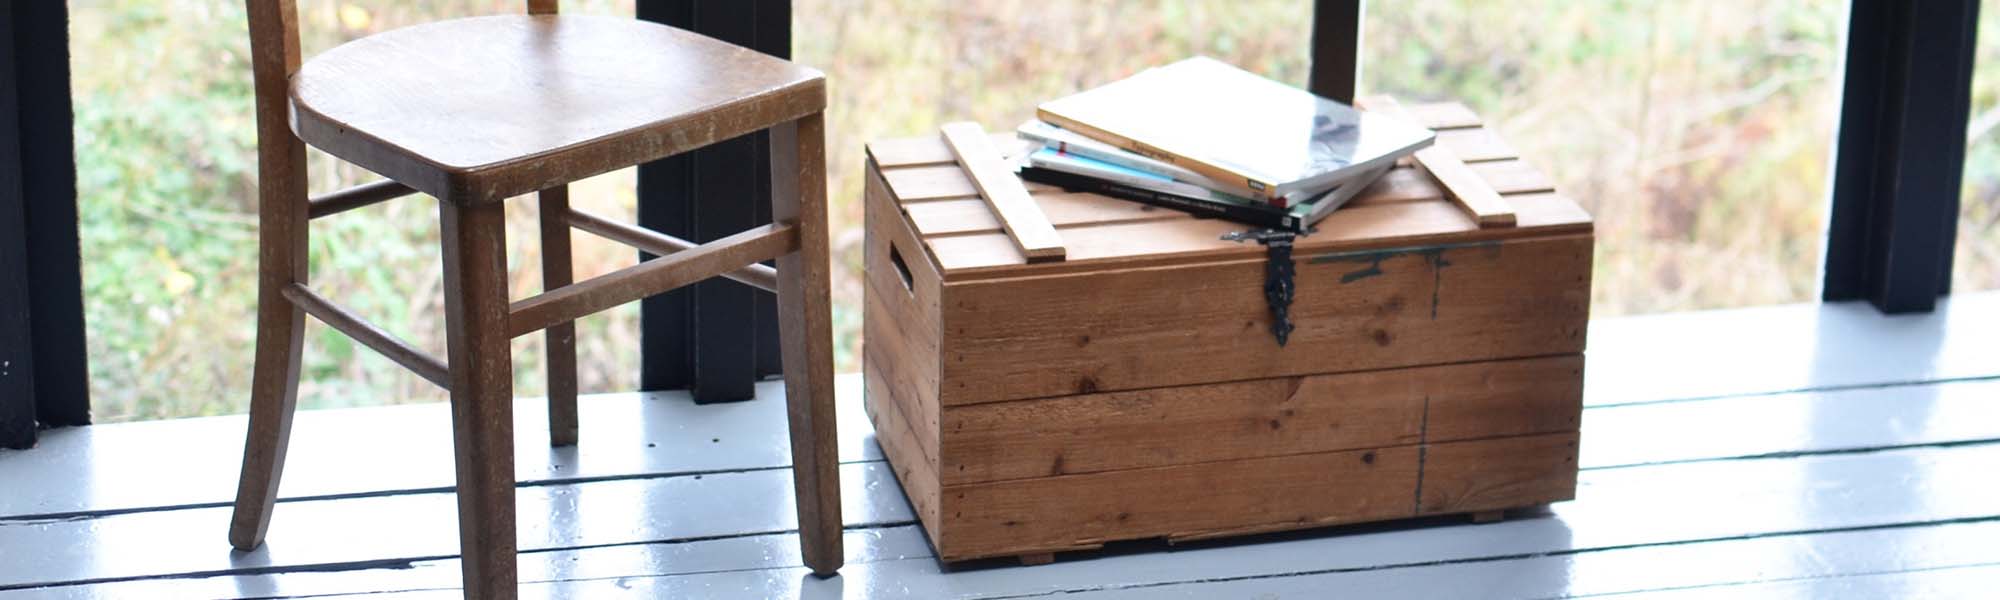 Functional Chests - Stylish Storage Solutions